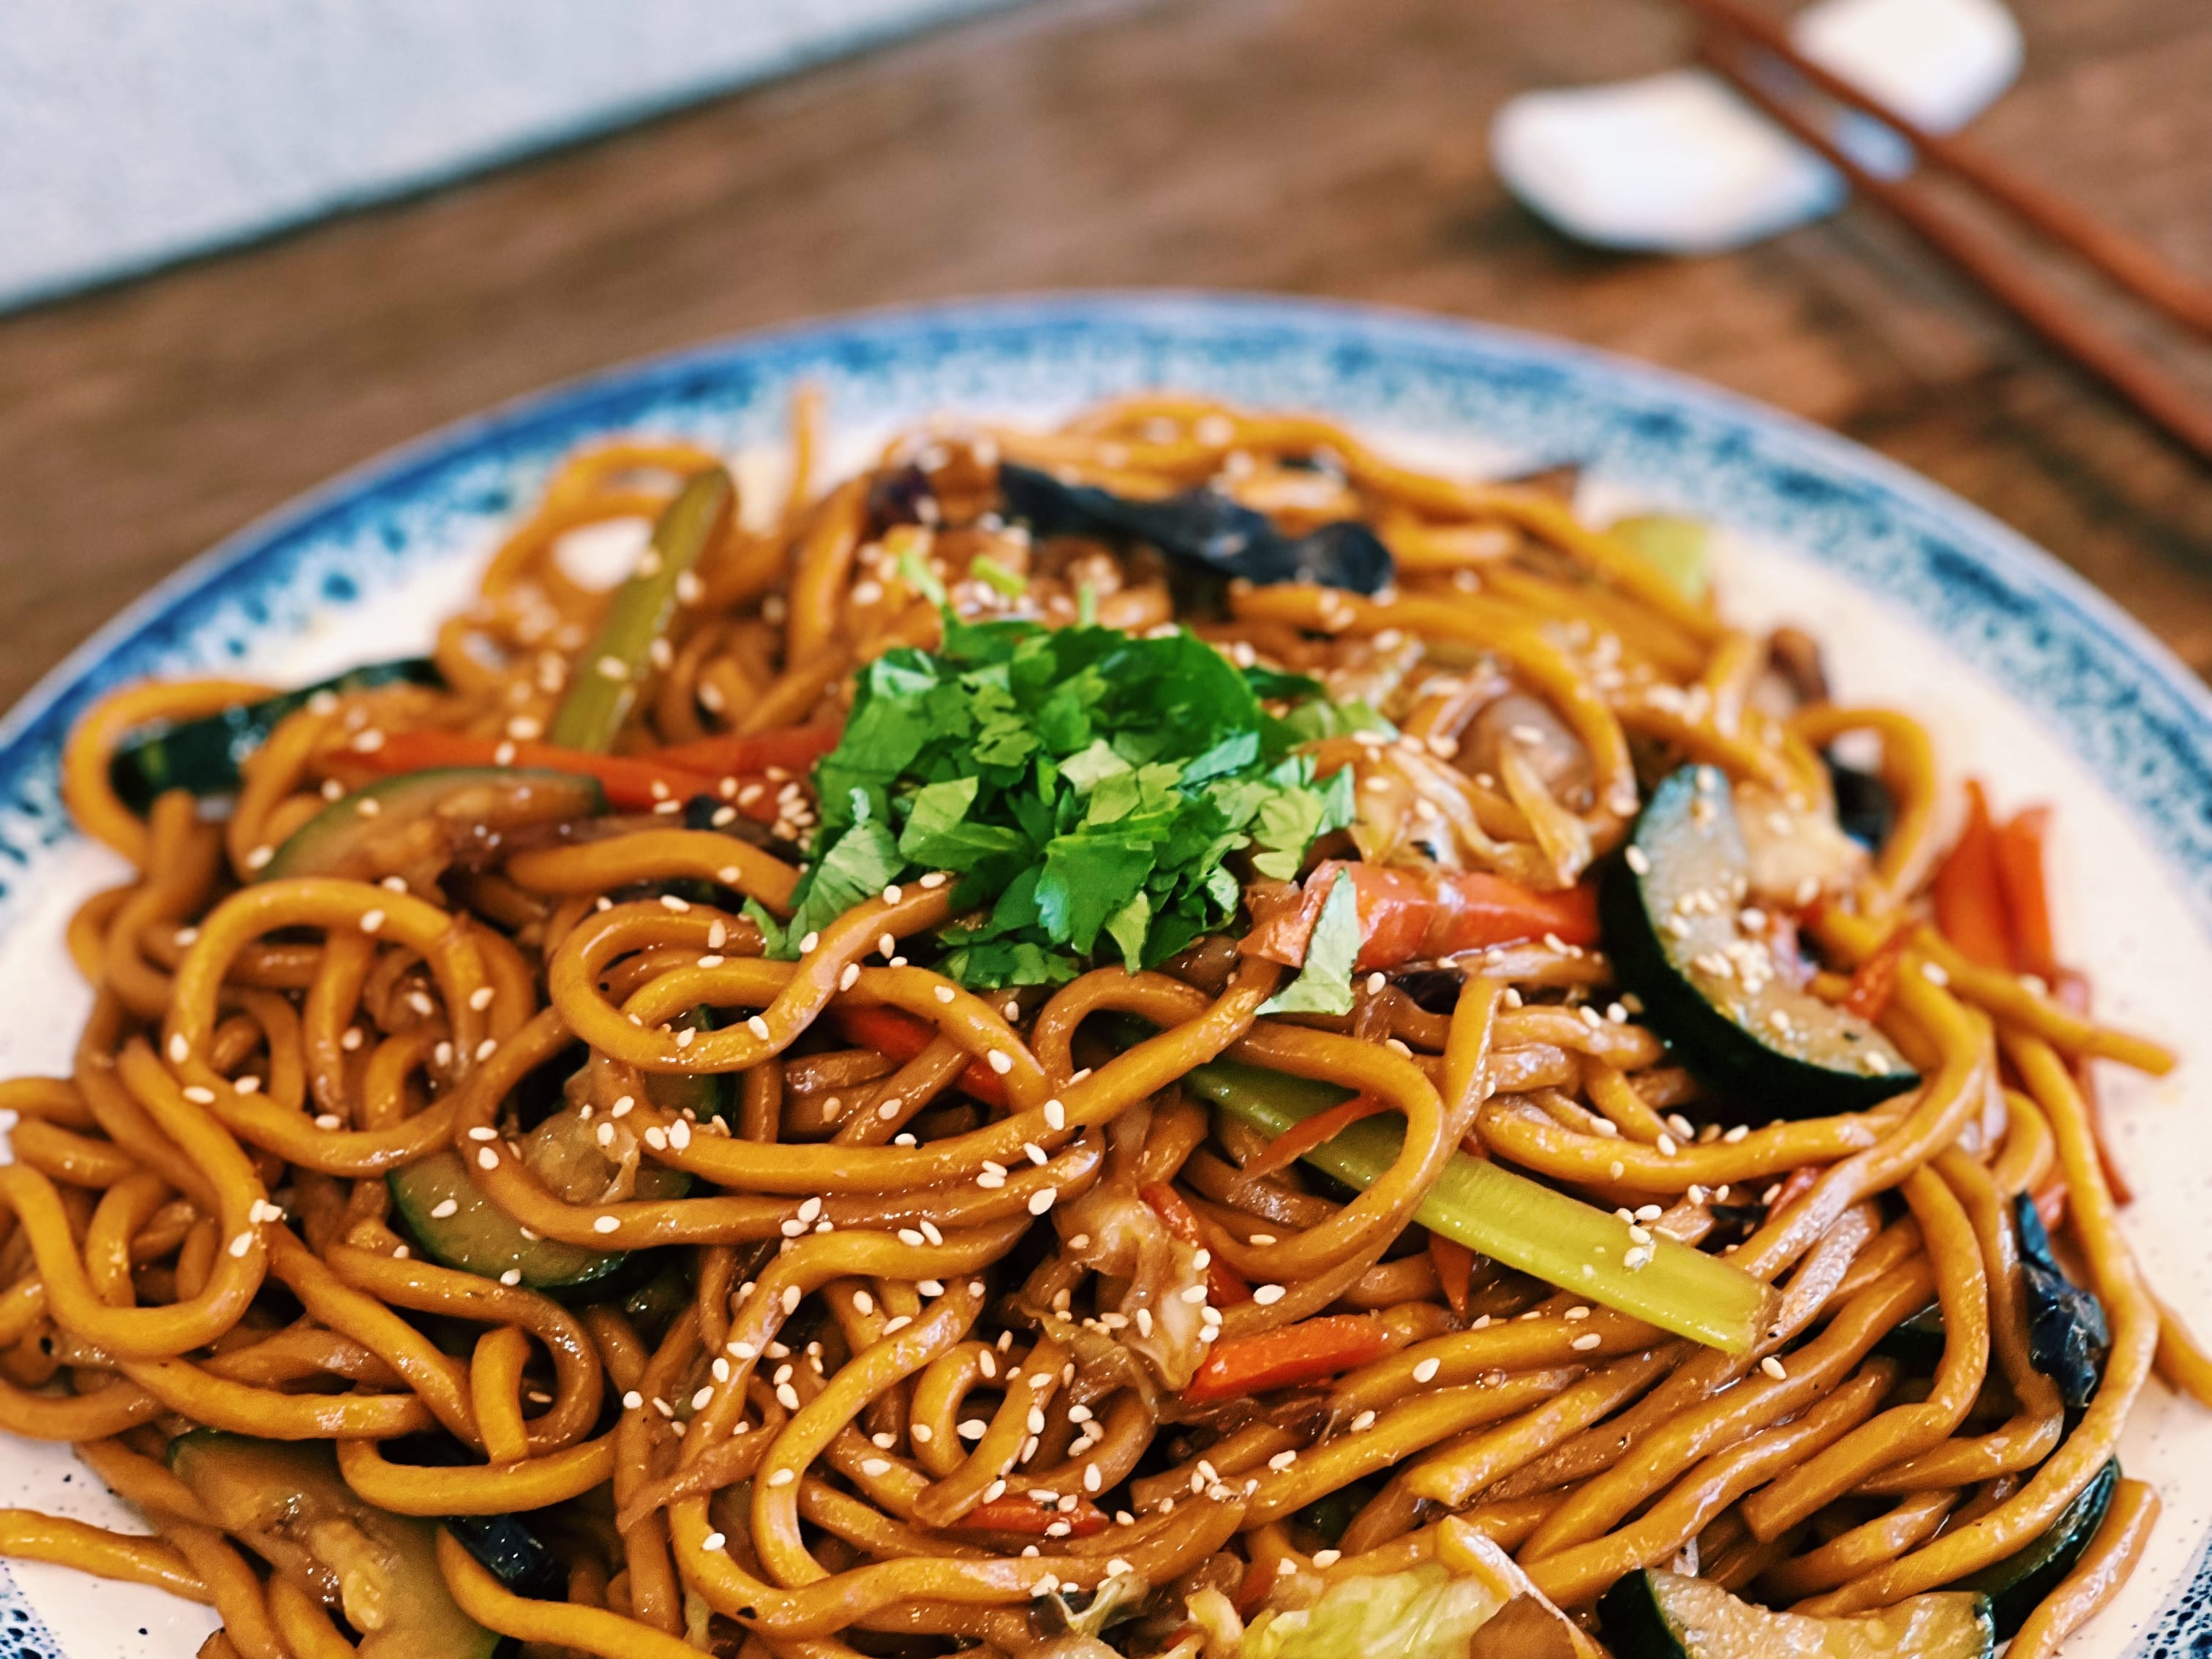 Soy Sauce Pan-fried Noodles (15 Minutes!) - Tiffy Cooks